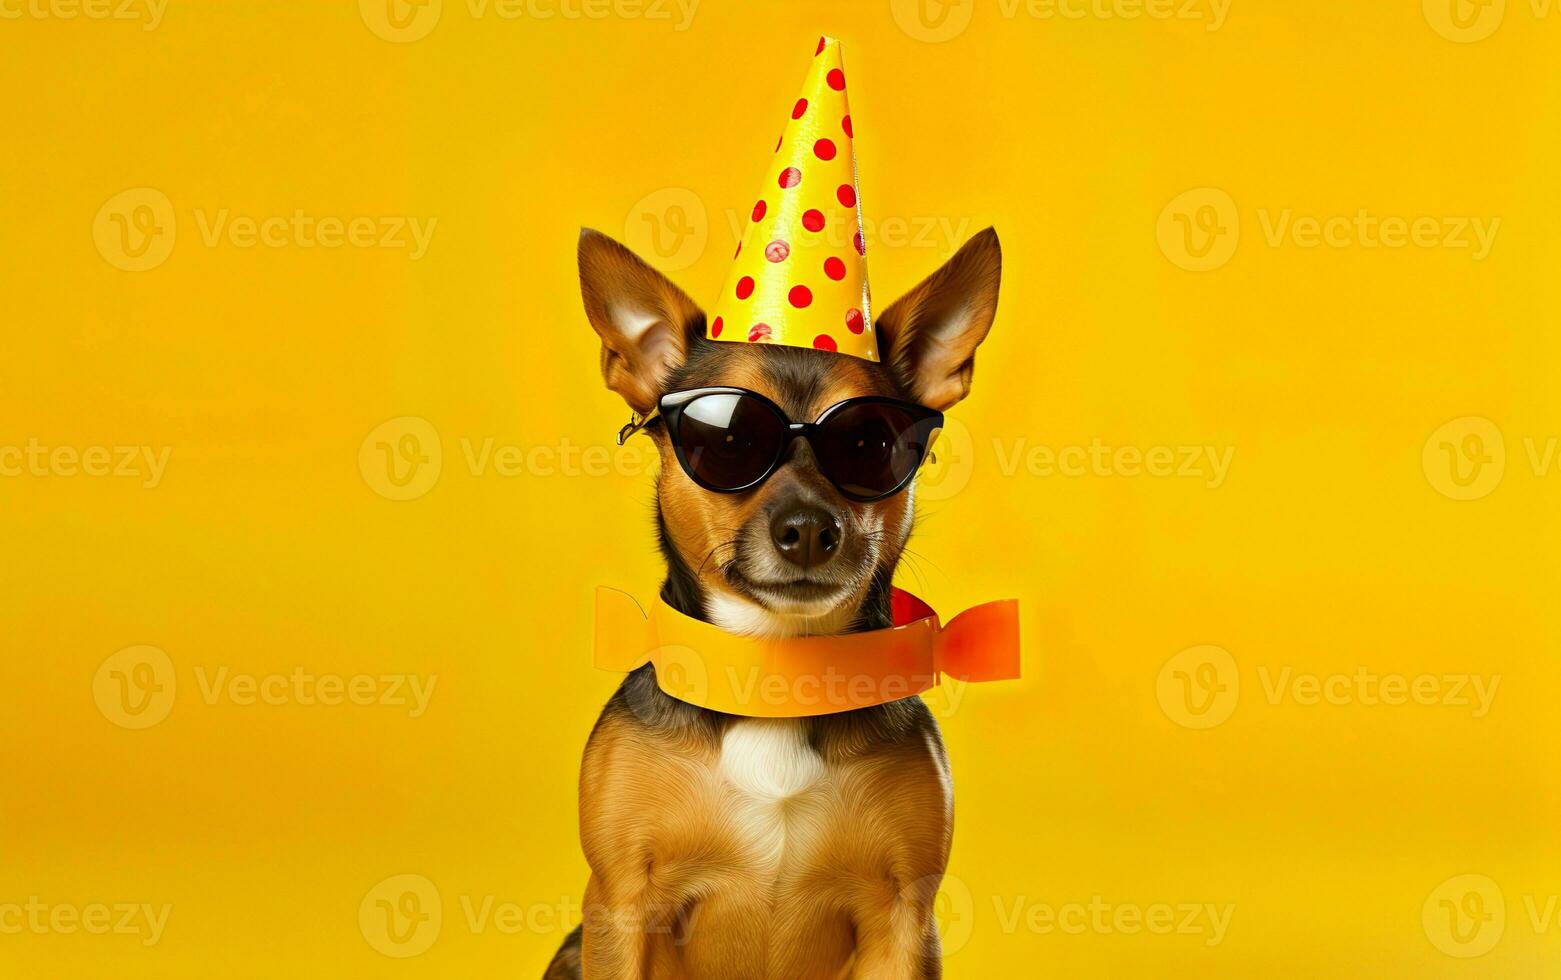 Funny Pet Celebrating, Cute dog in Party Hat and Sunglasses over Yellow Background. photo